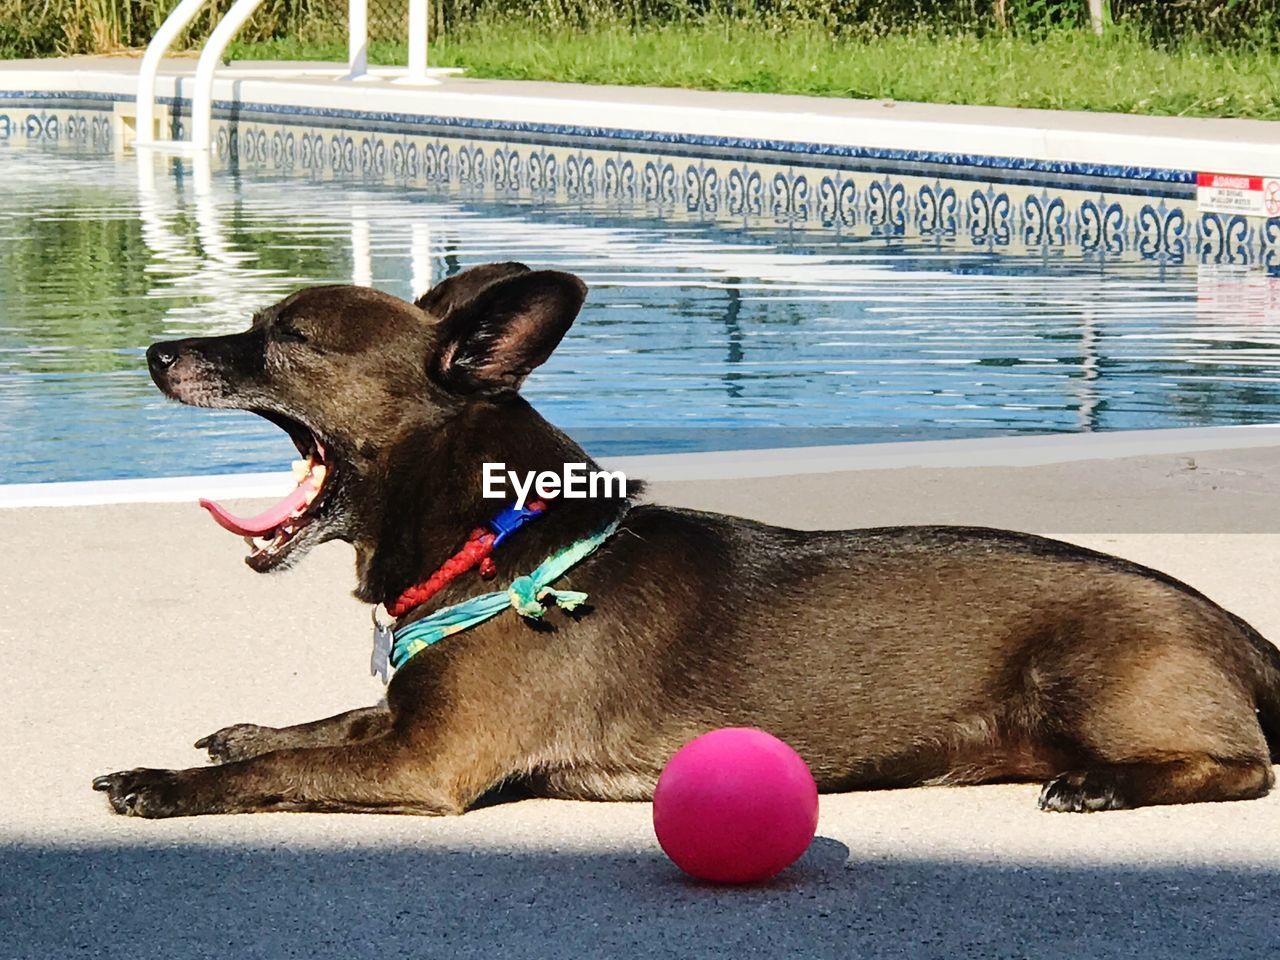 VIEW OF A DOG WITH BALL ON SWIMMING POOL